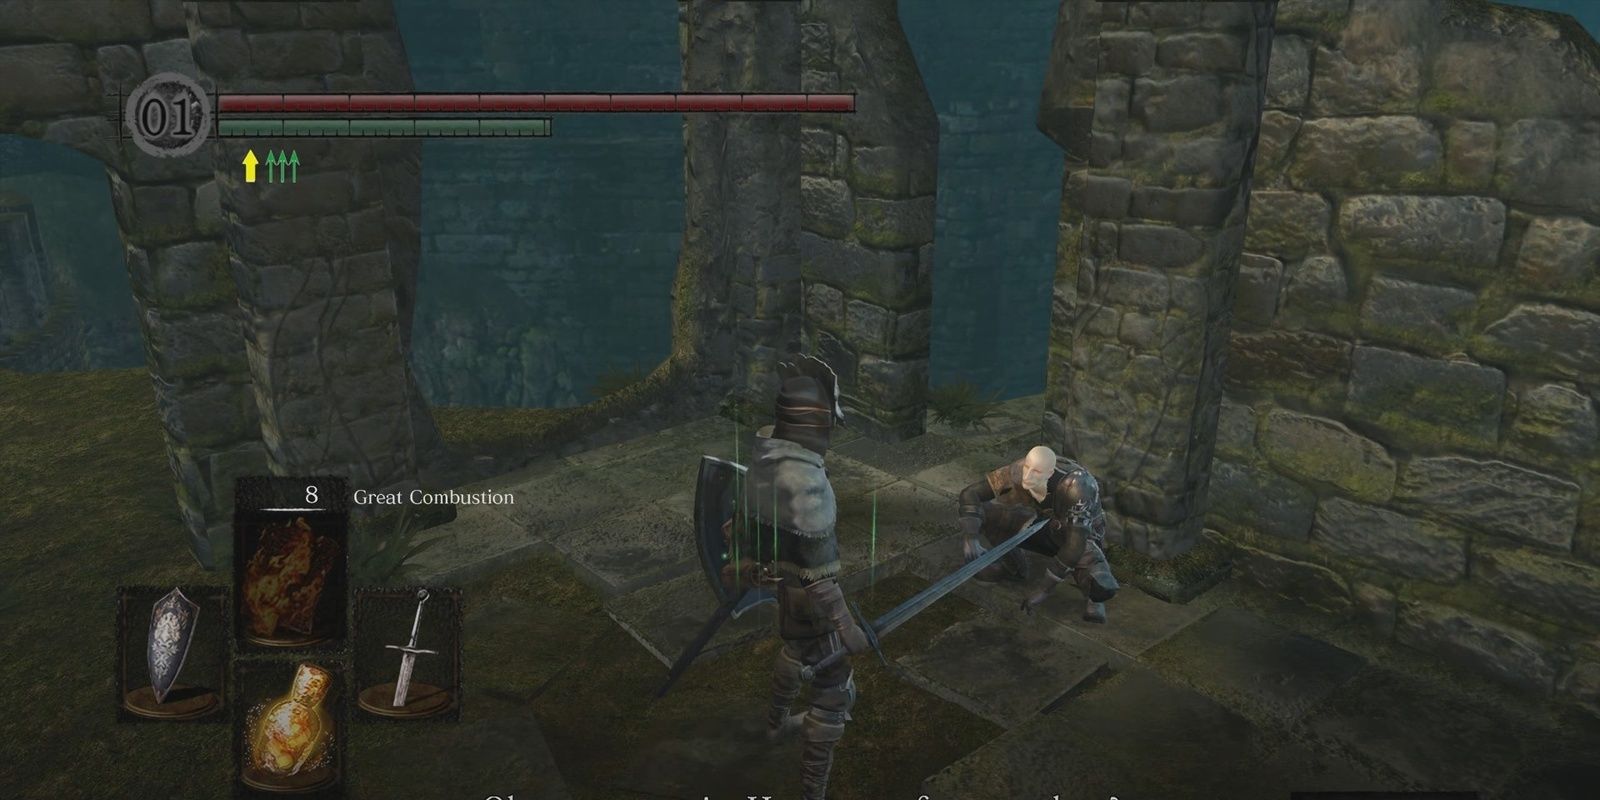 Reliable patches in Dark Souls 1